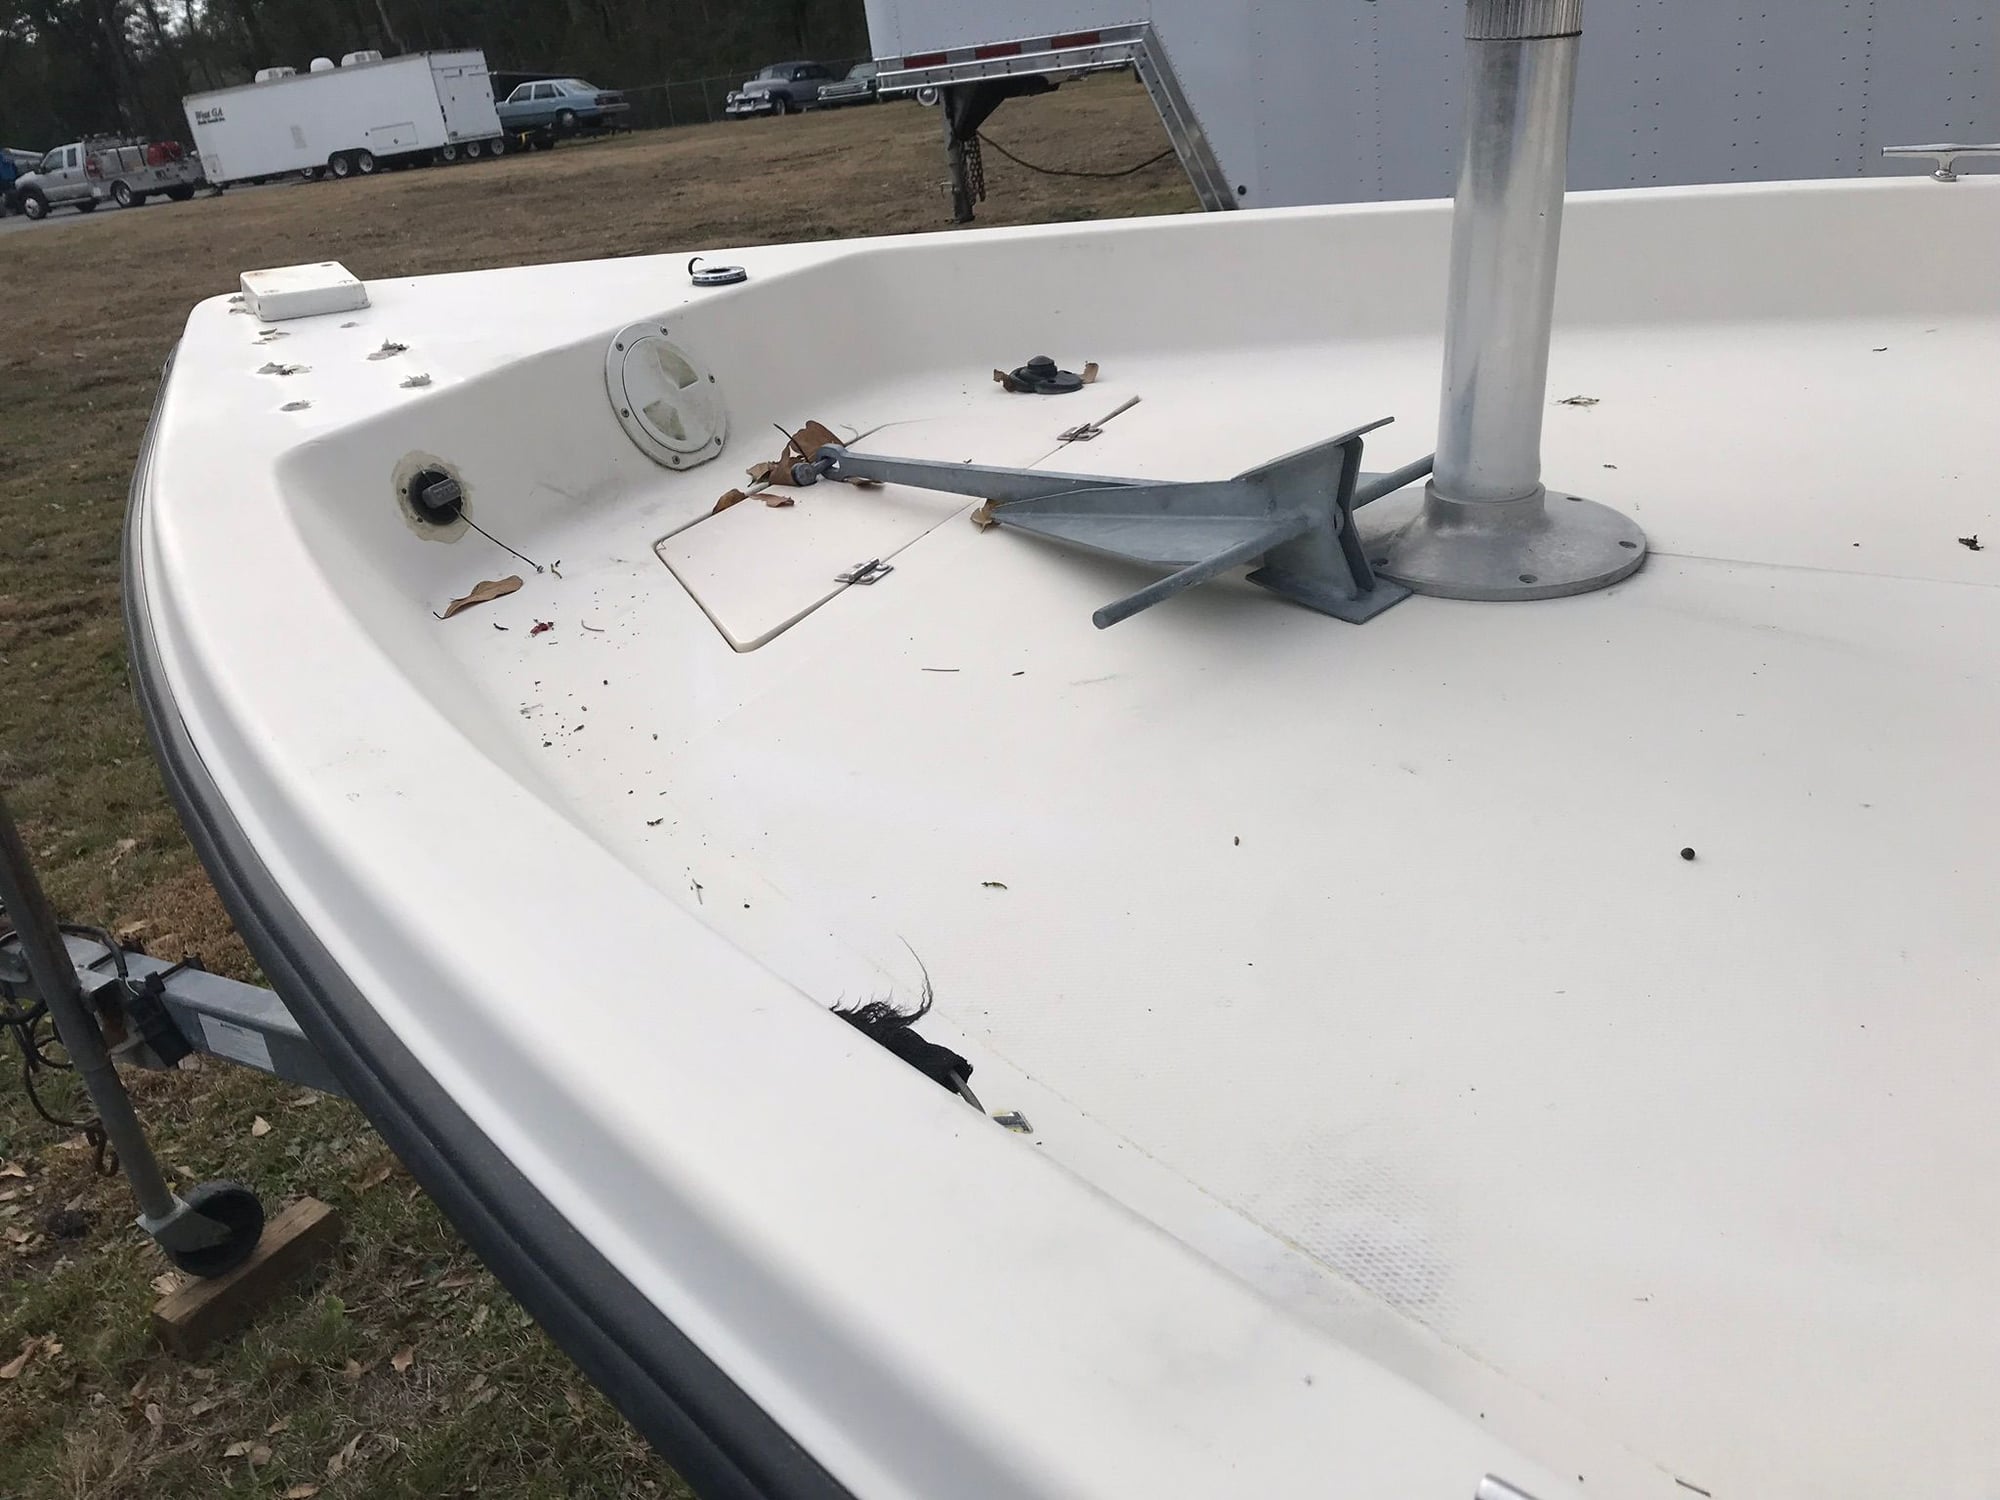 Fixing holes in boat? - KEY WEST BOATS FORUM